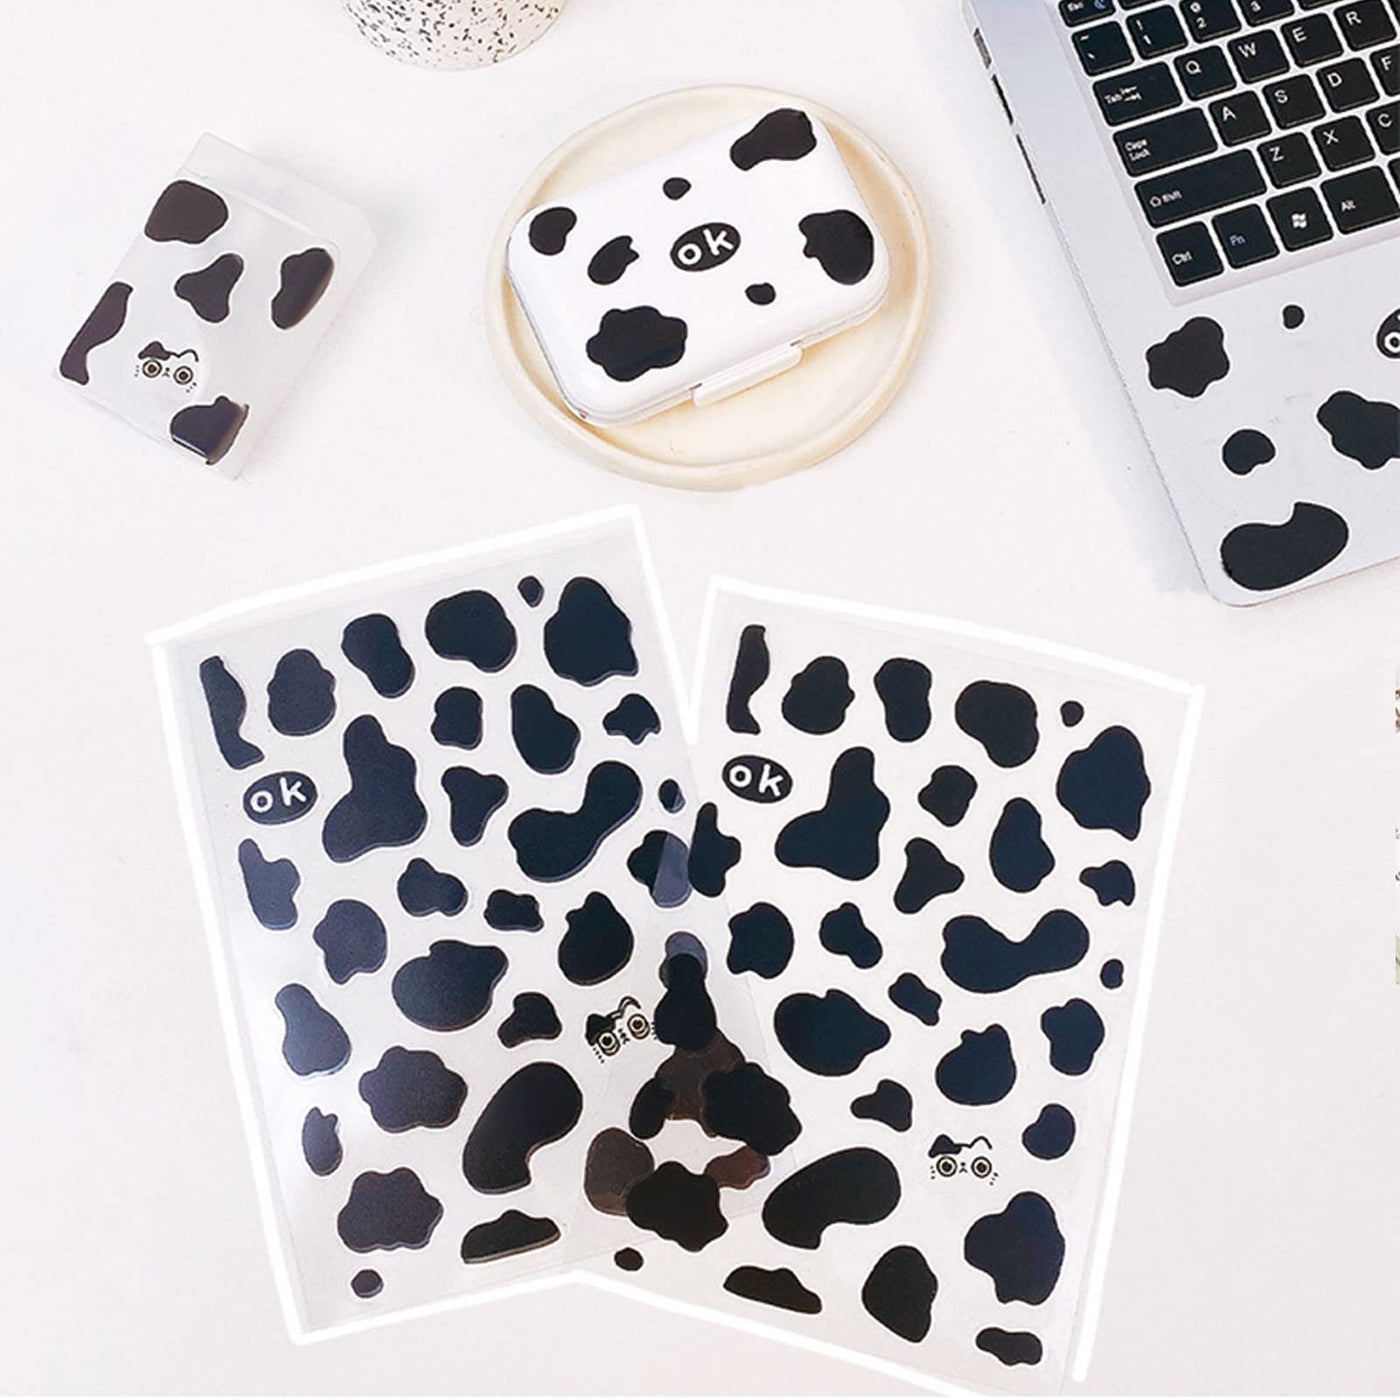 12 Sheets Small Cow Print Sticker Black Spot Vinyl Decal Sticker Cow  Patches Waterproof DIY Decorative Stickers Crafts